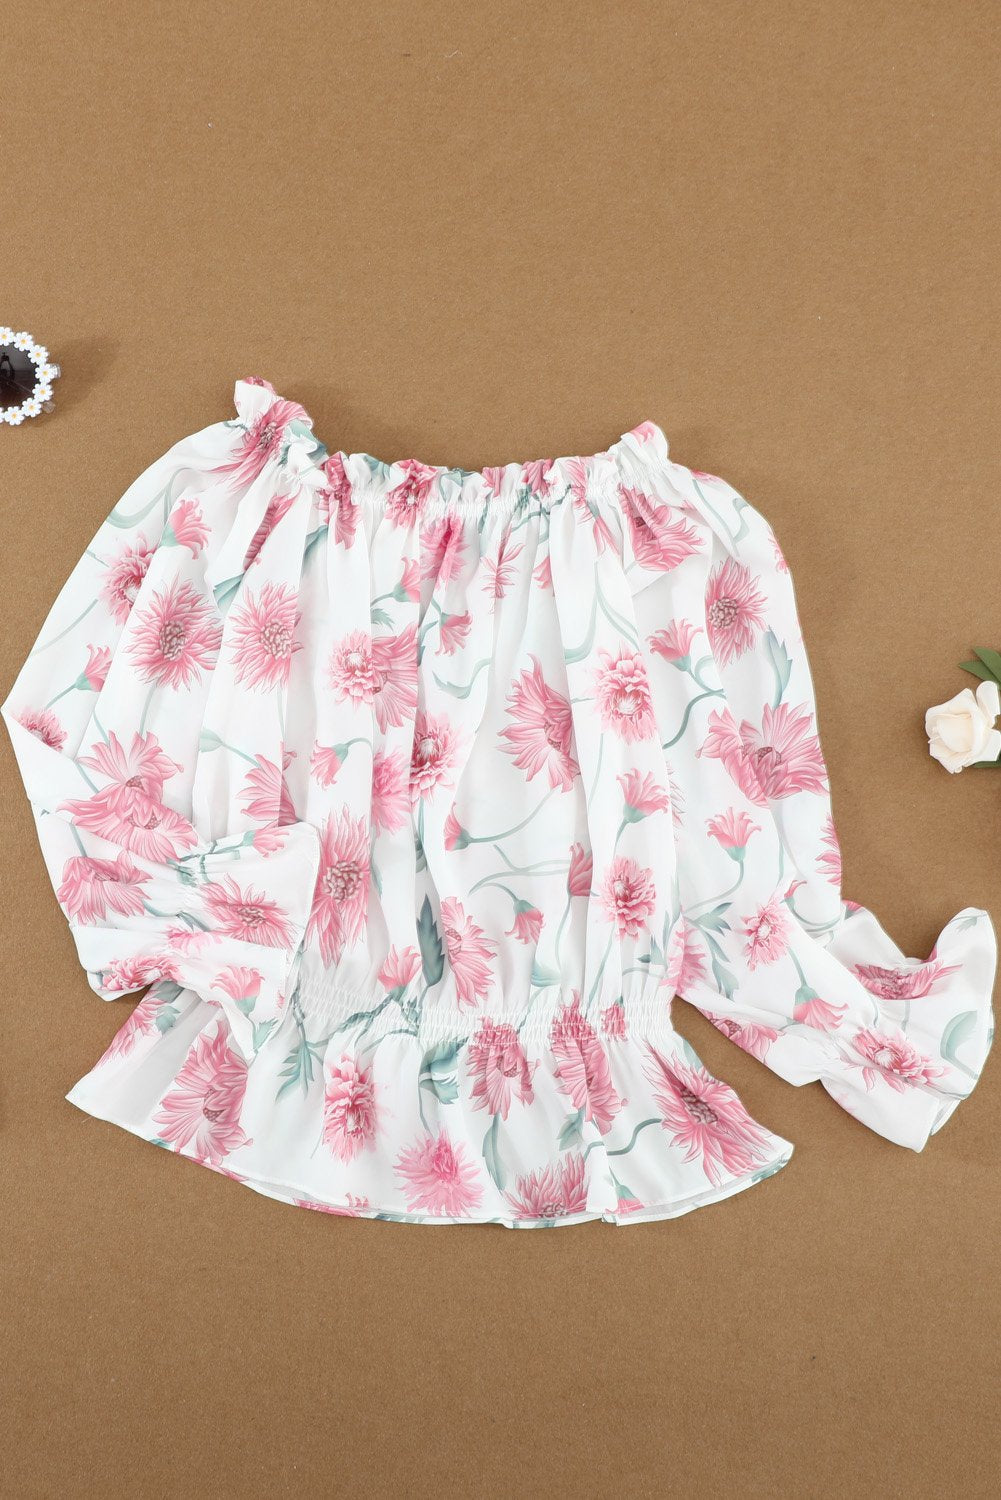 Chic White Pink Floral Print Off the Shoulder Blouse